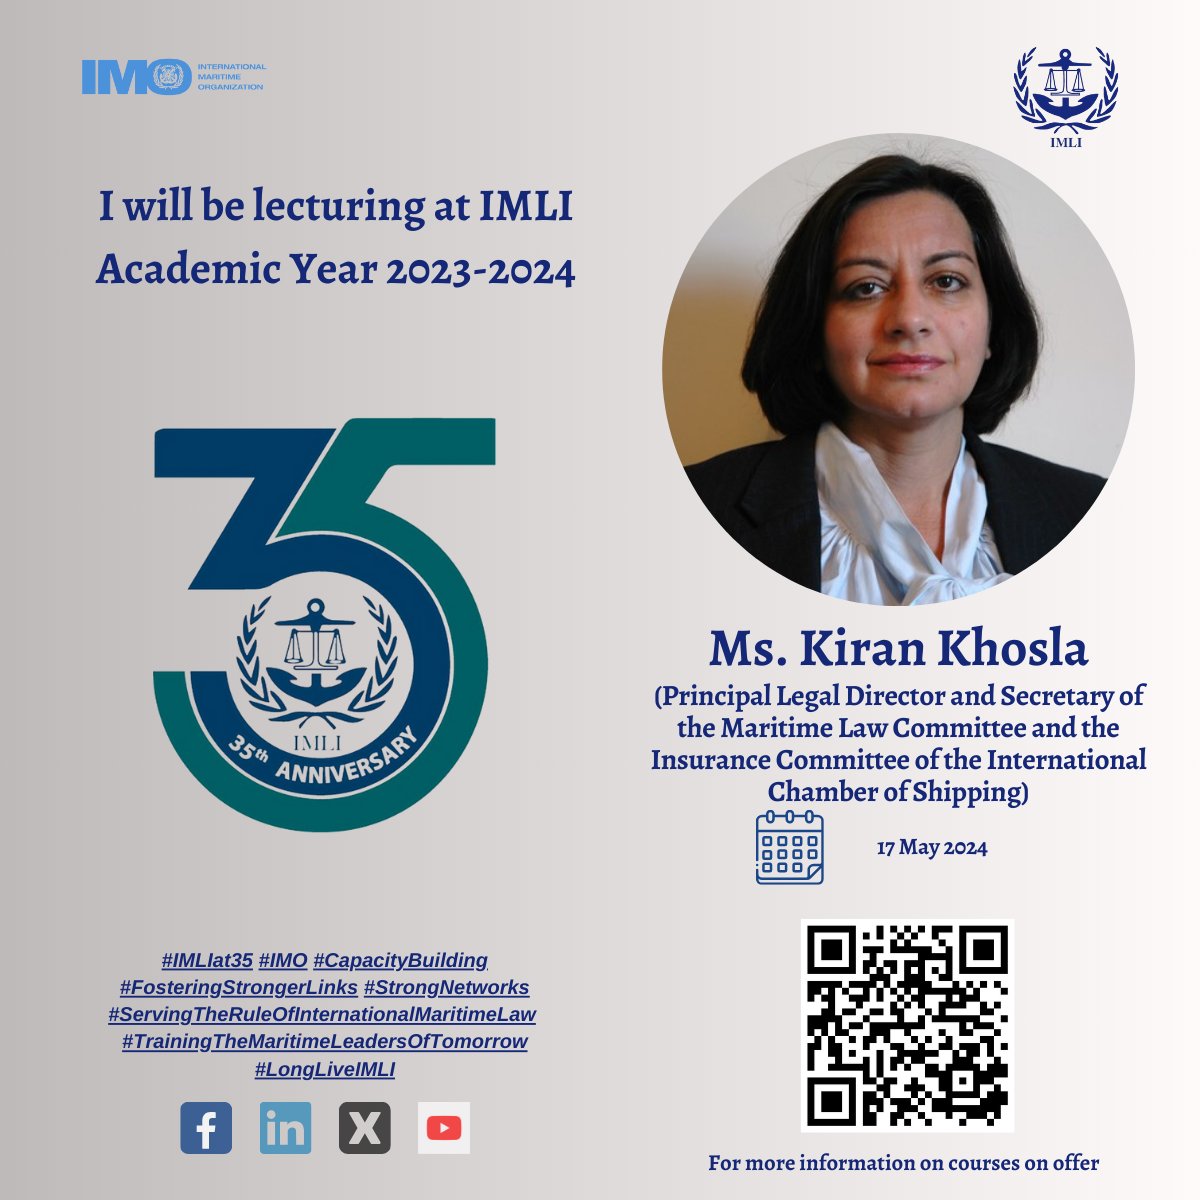 Kiran Khosla, ICS Principle Director (Legal),will lecture at IMLI's 35th Academic Year contributing to the Institute's mission of training the maritime leaders of tomorrow,this Friday 17th May #IMLIat35 #IMO #CapacityBuilding #FosteringStrongerLinks #StrongNetworks #LongLiveIMLI